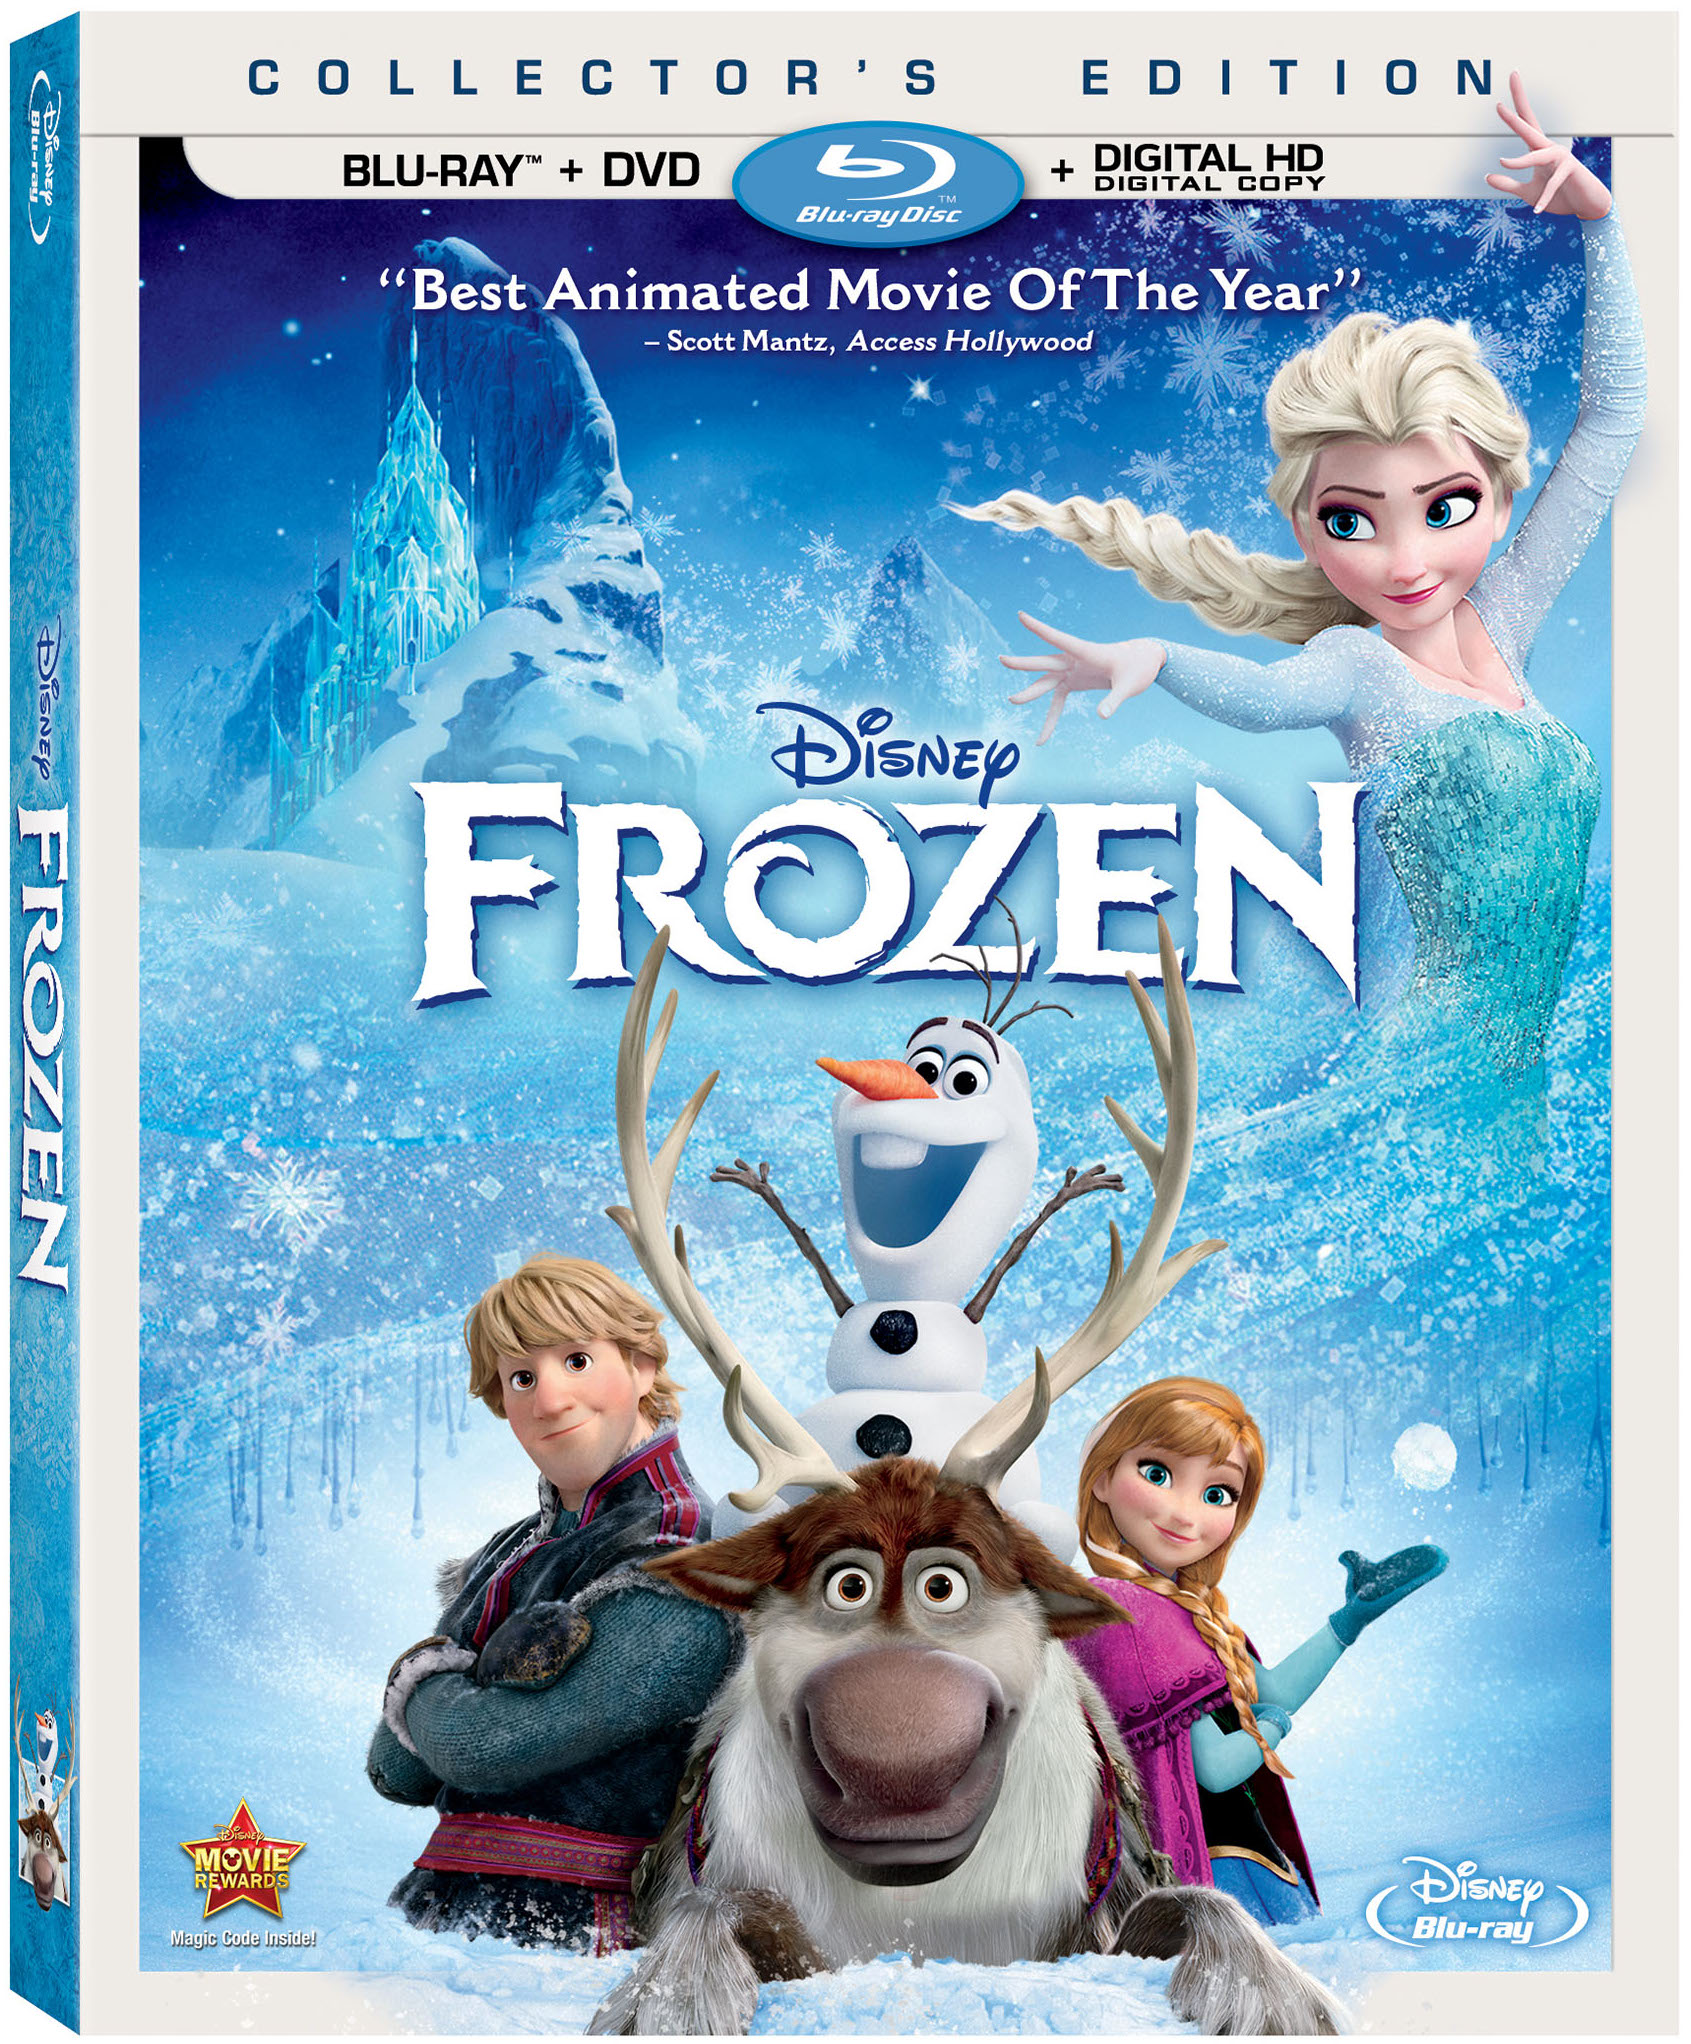 “Frozen” Becomes the Highest Grossing Animated Film Ever